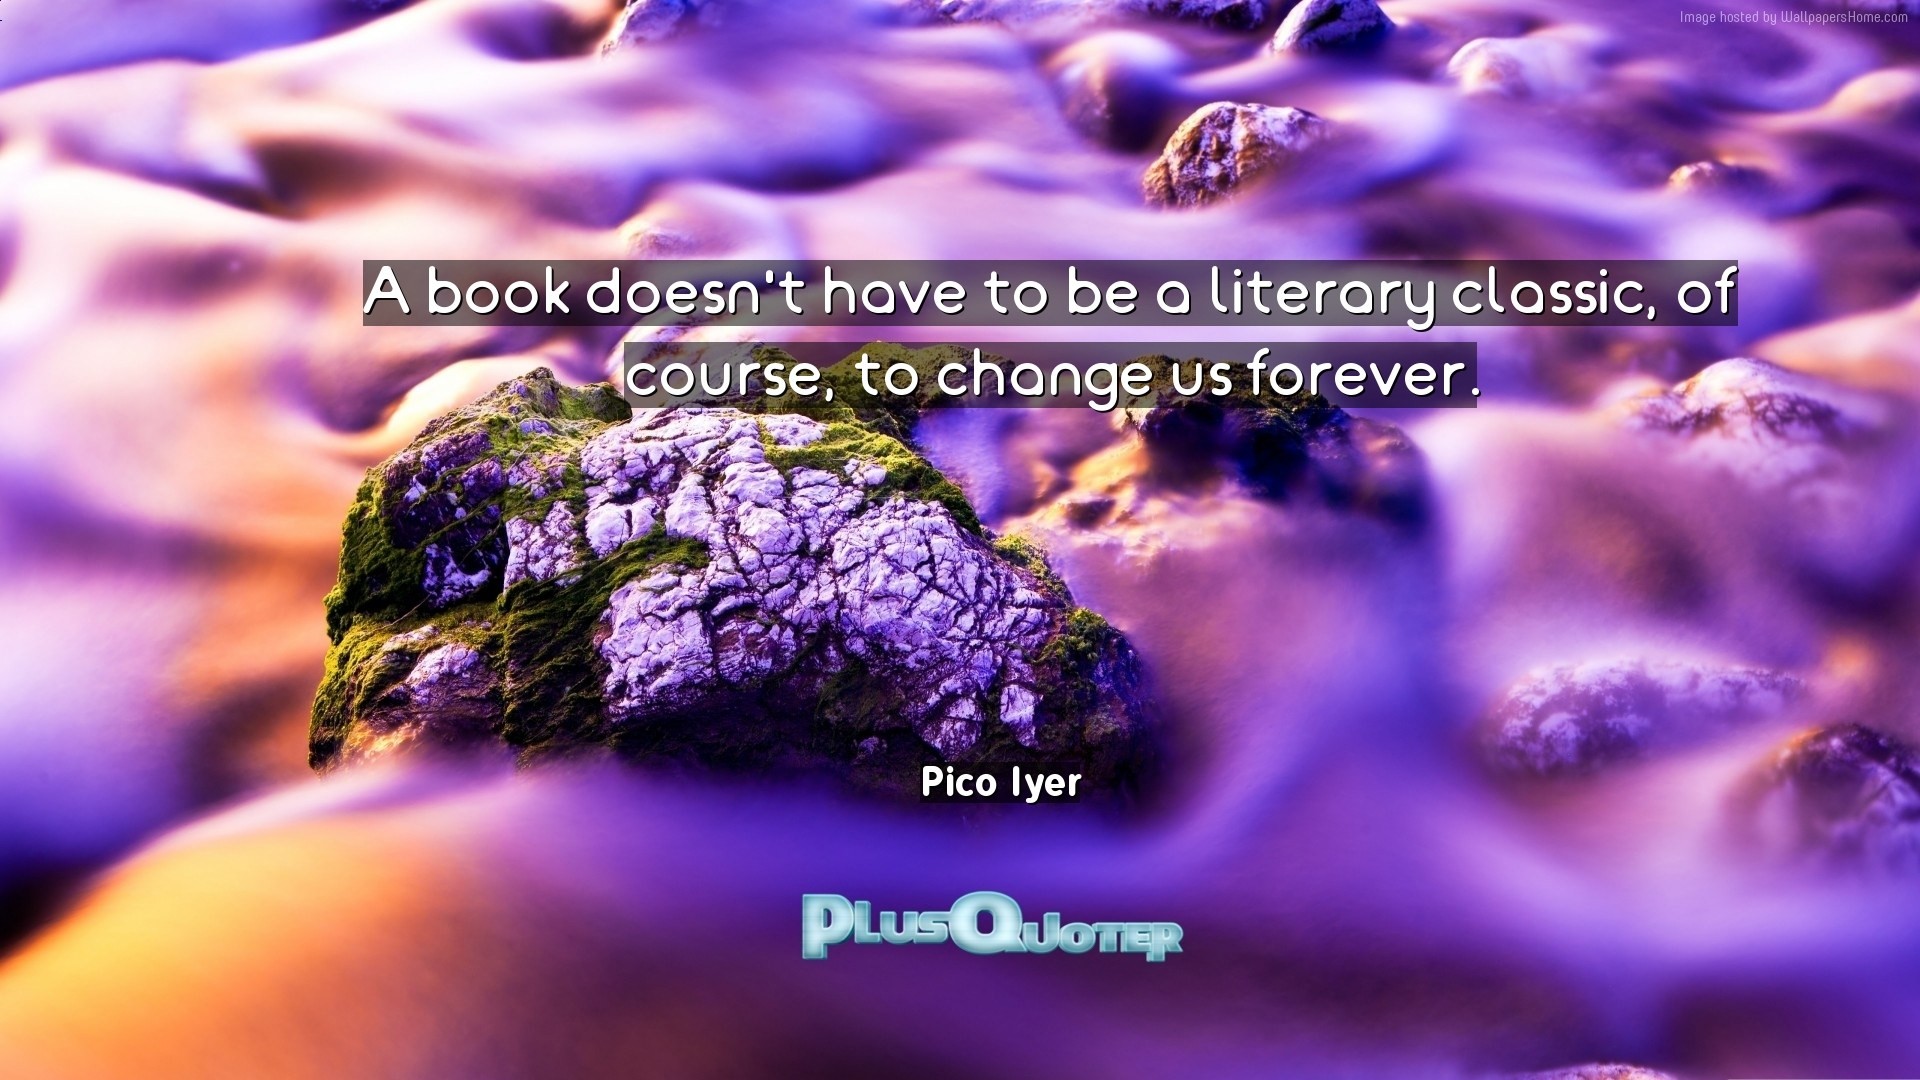 1920x1080 Download Wallpaper with inspirational Quotes- "A book doesn